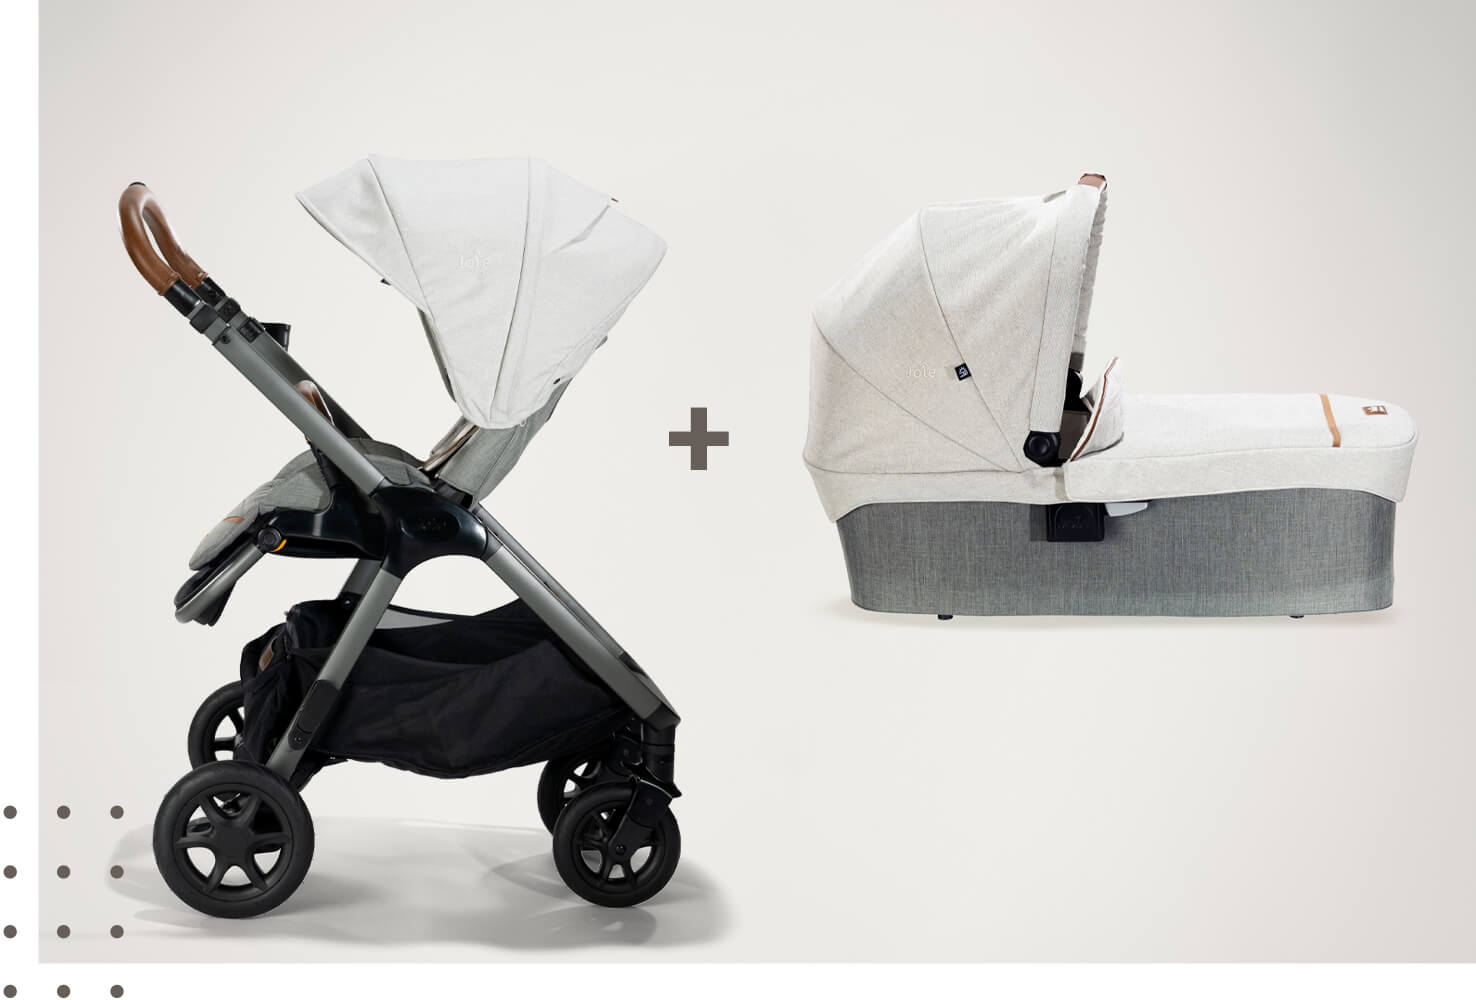 Joie Signature ramble carry cot with the Finiti pushchair from a side view with hood raised.